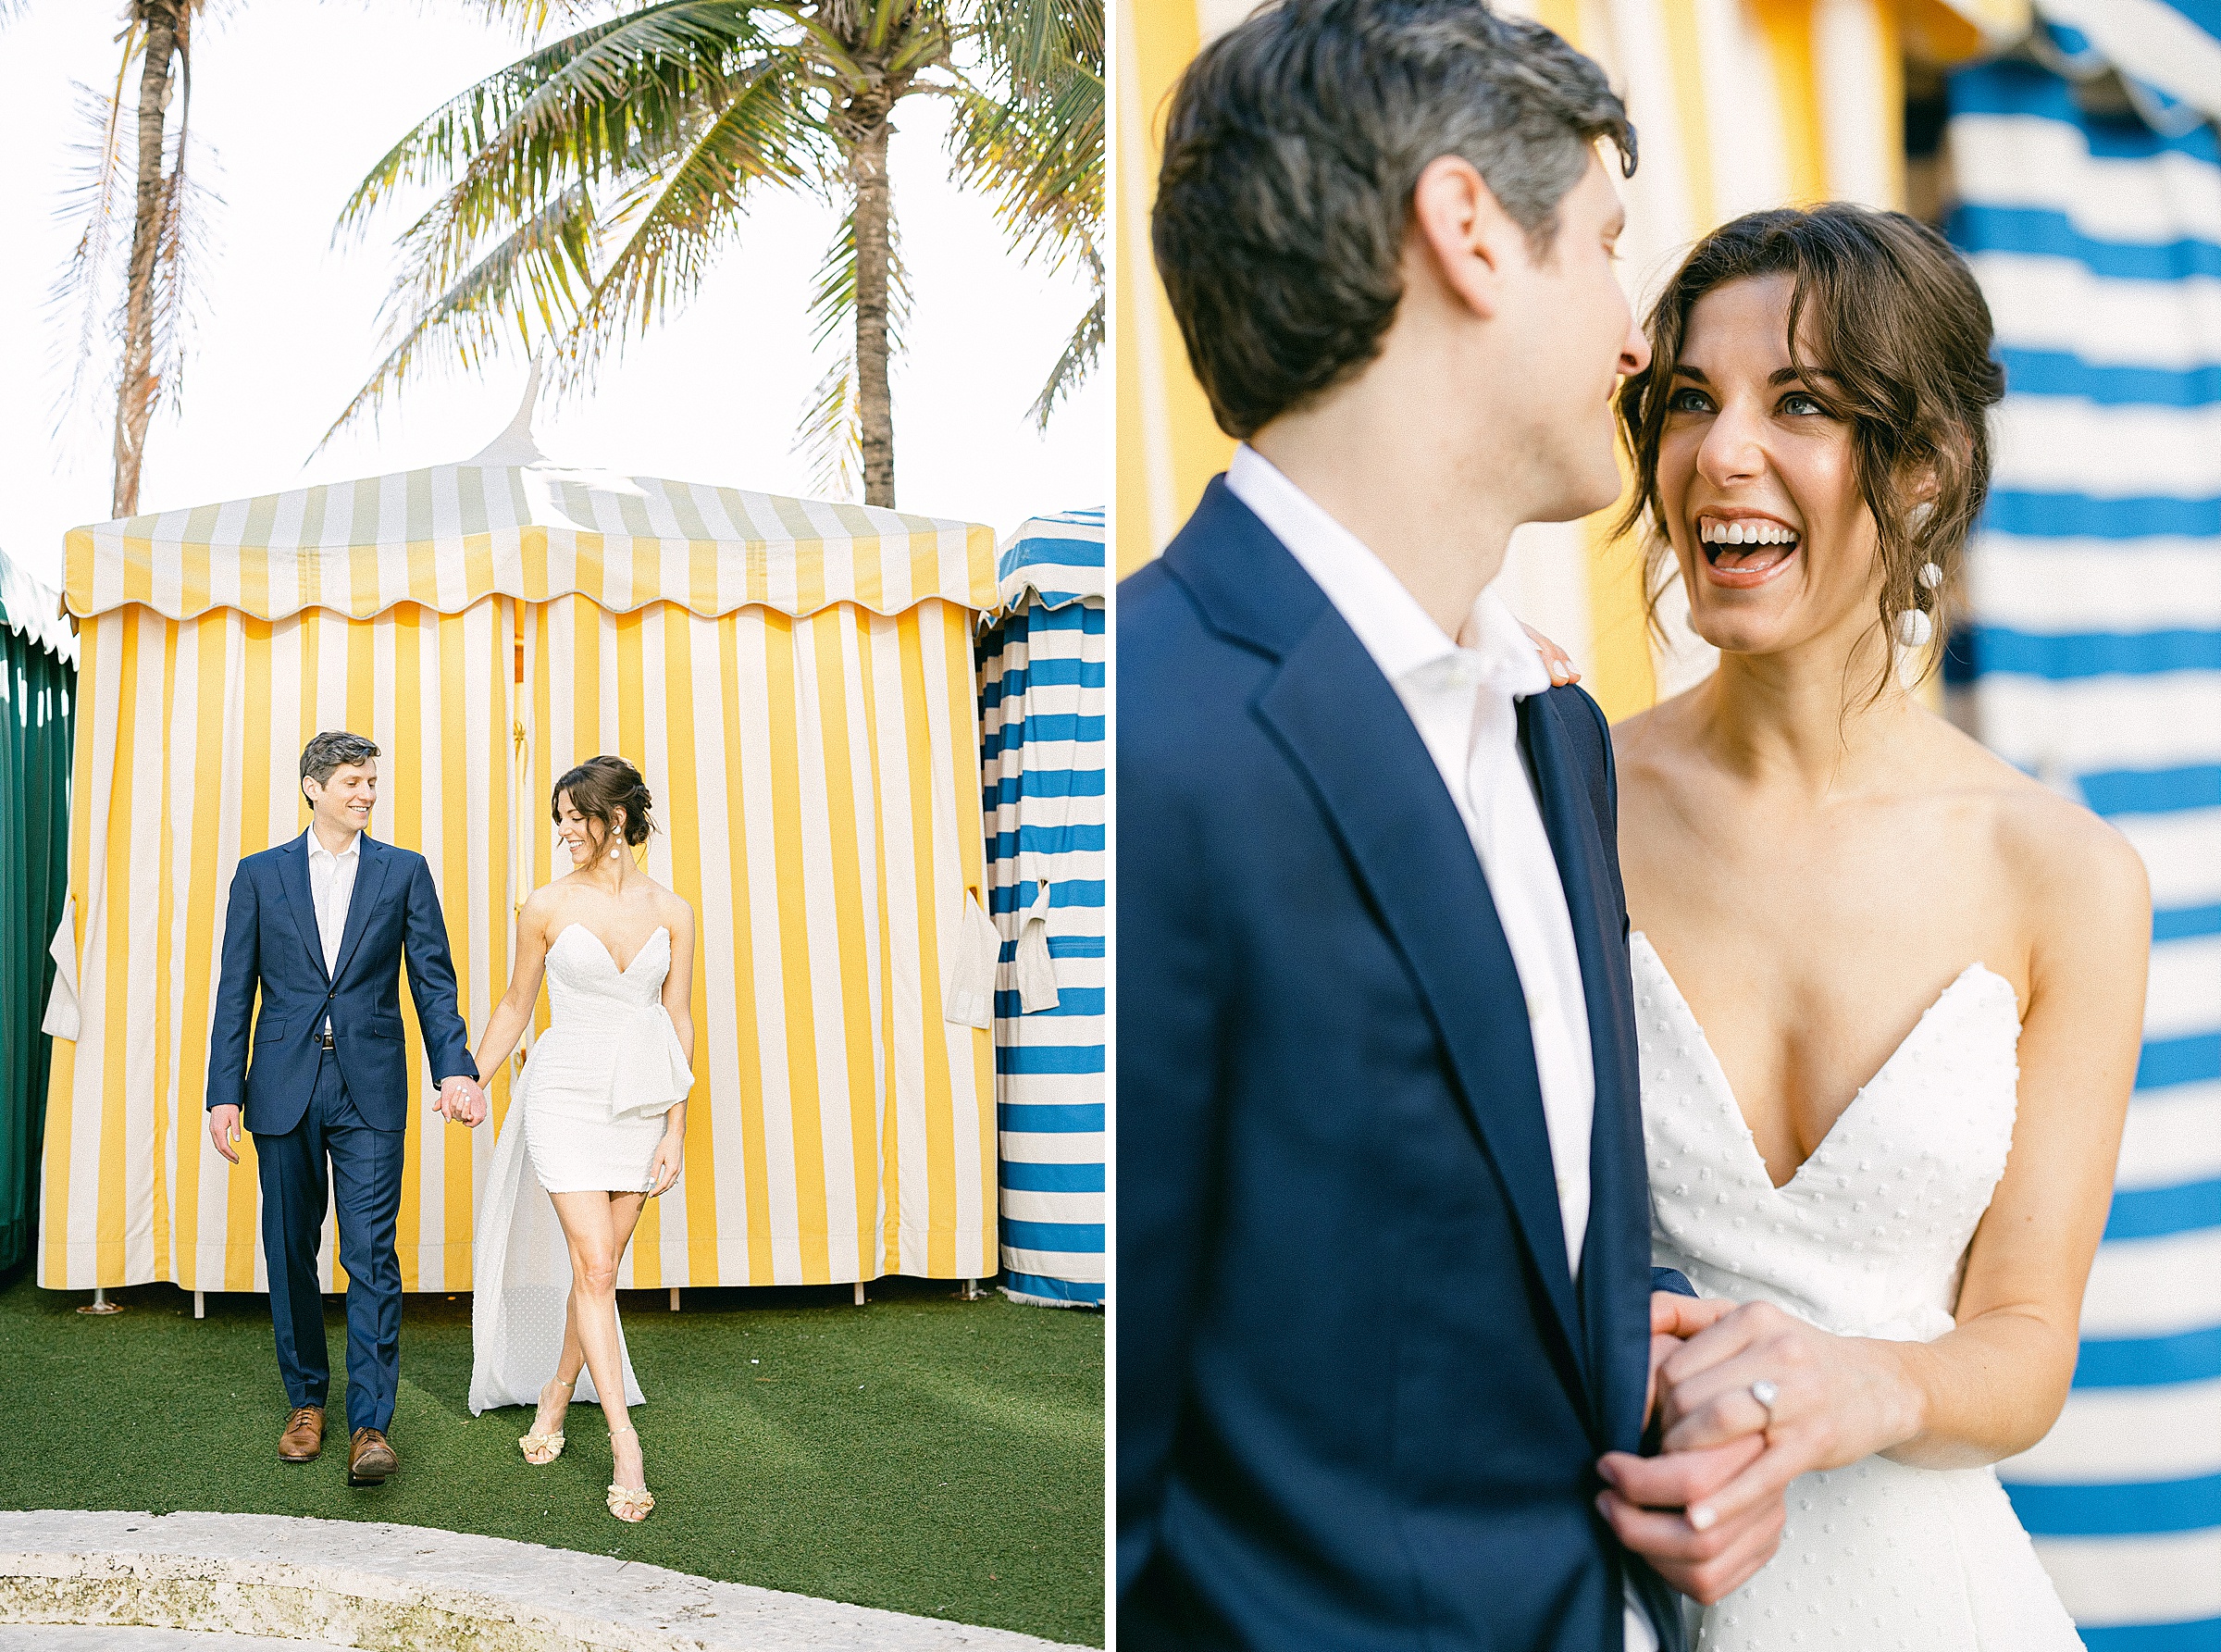 Engaged couple holding hands as they walk together in front of the colorful stripped cabanas at the Confidante Hotel in Miami Beach